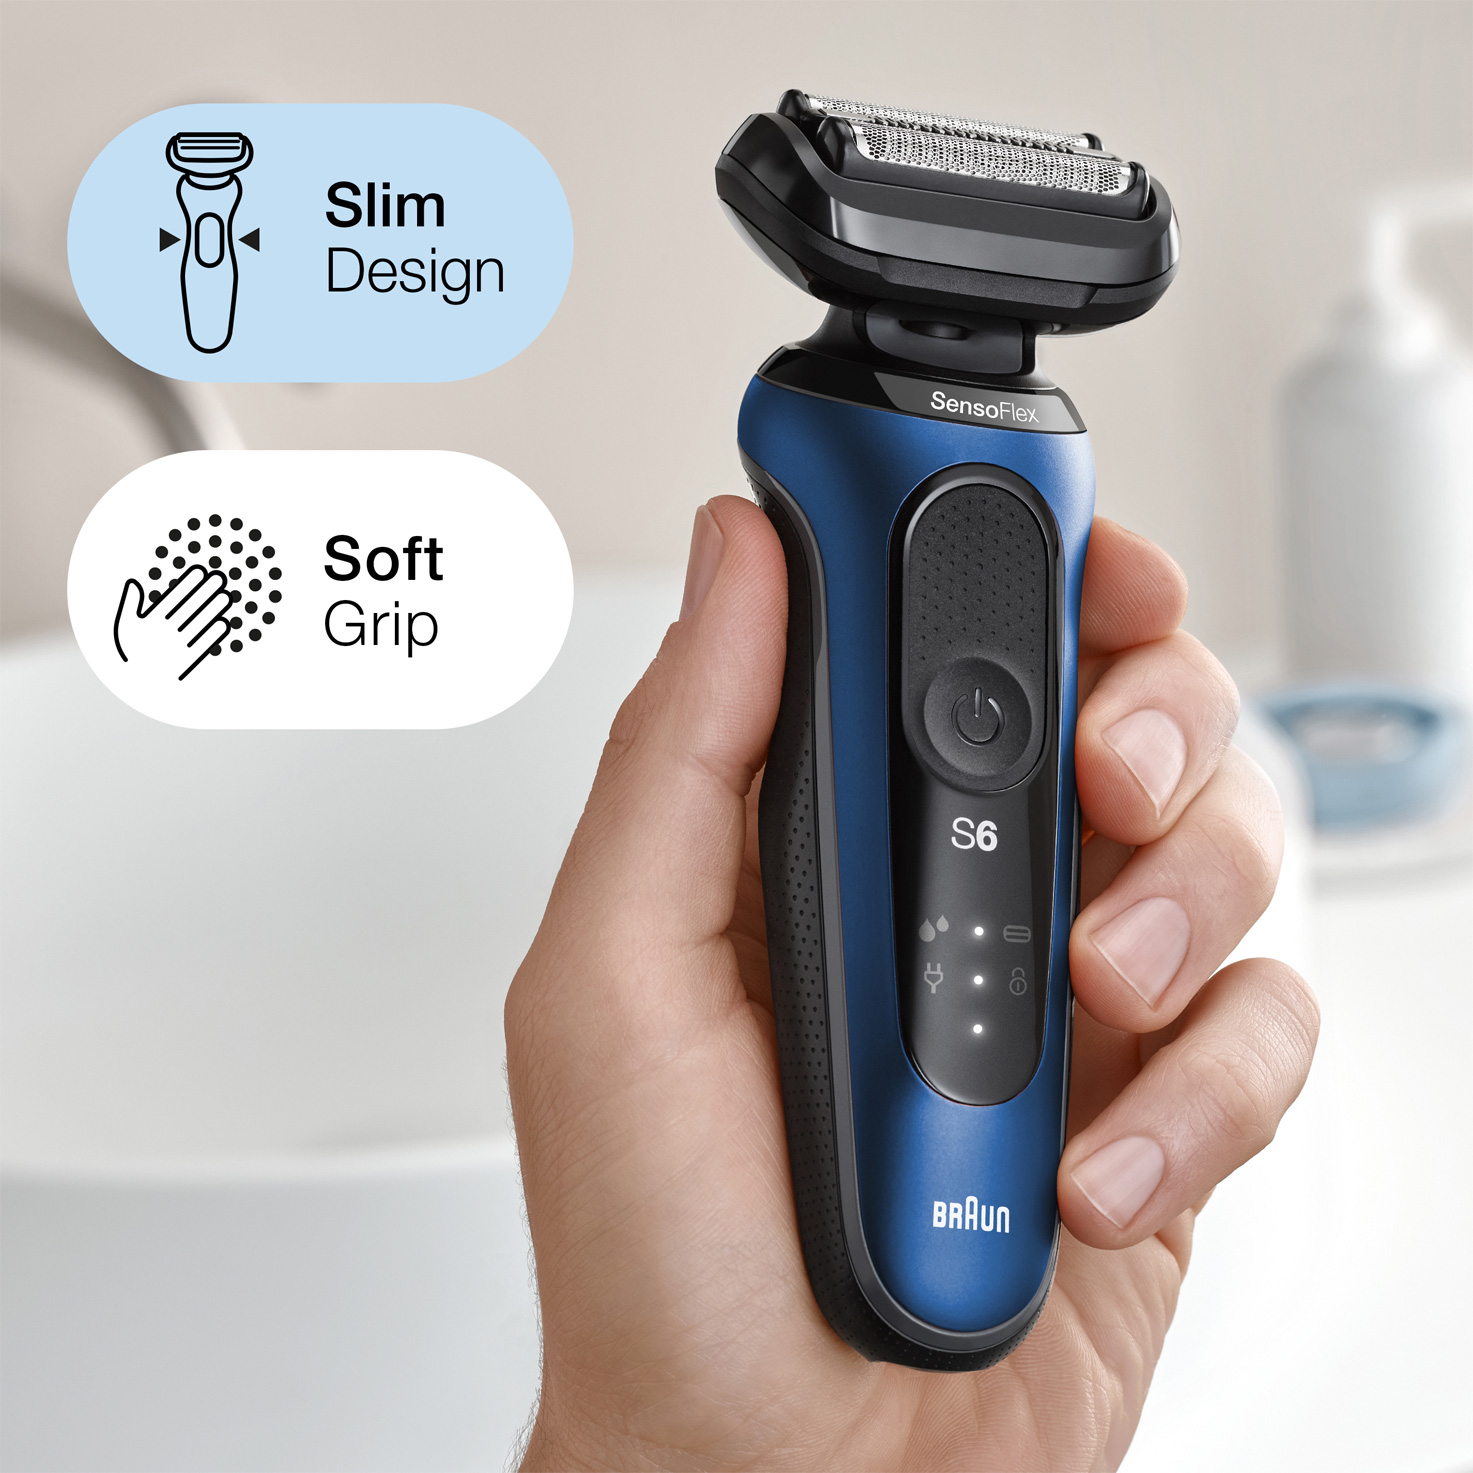 Series 6 61-B1500s Braun | shaver and SG travel & with Wet case blue. Dry 1 attachment